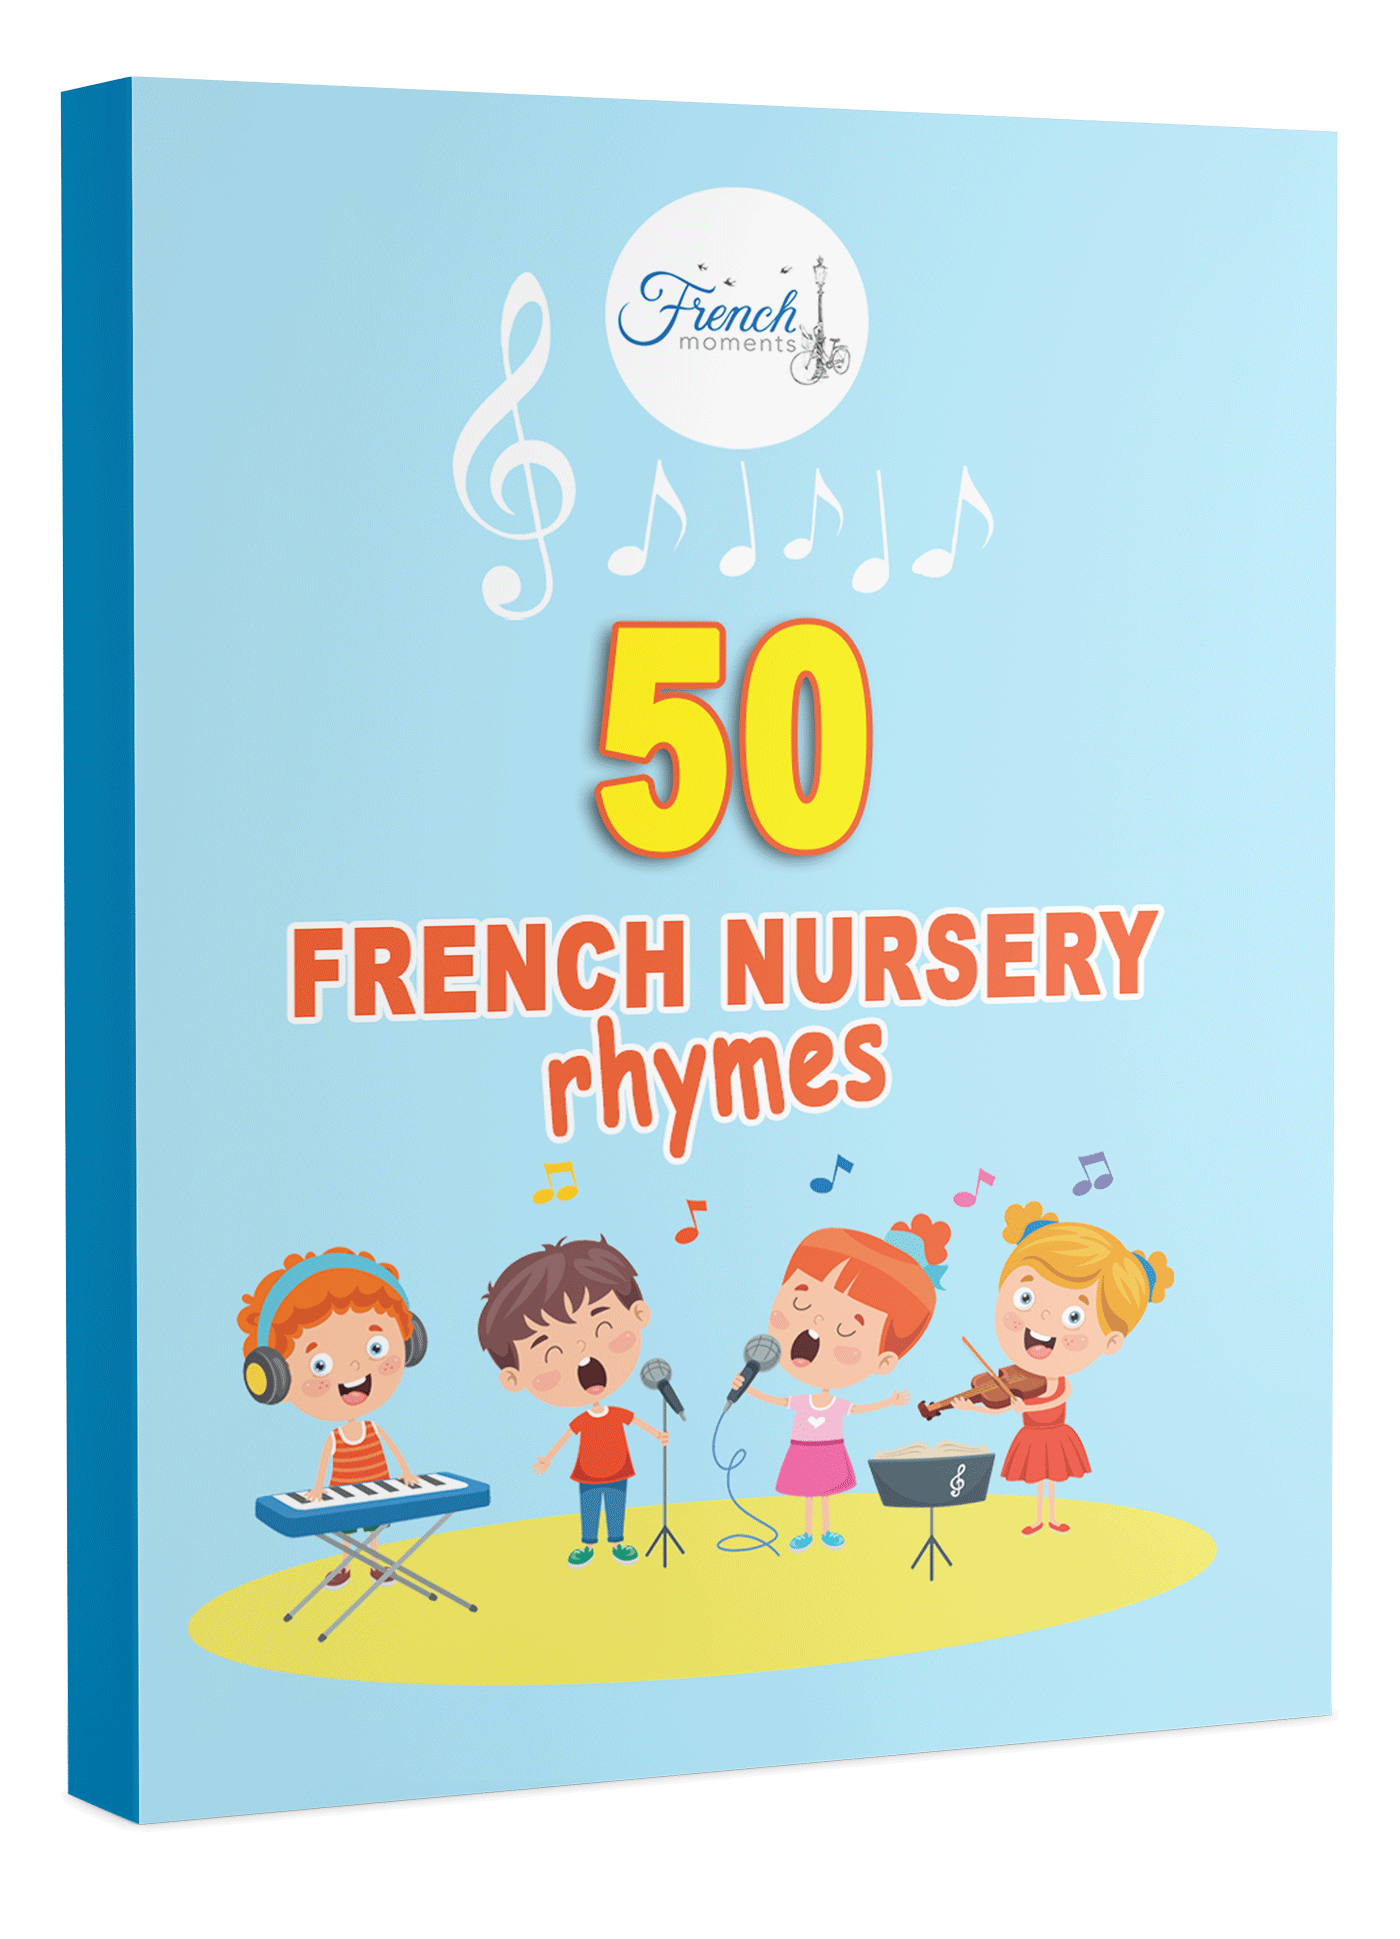 French Nursery Rhymes Cover by French Moments